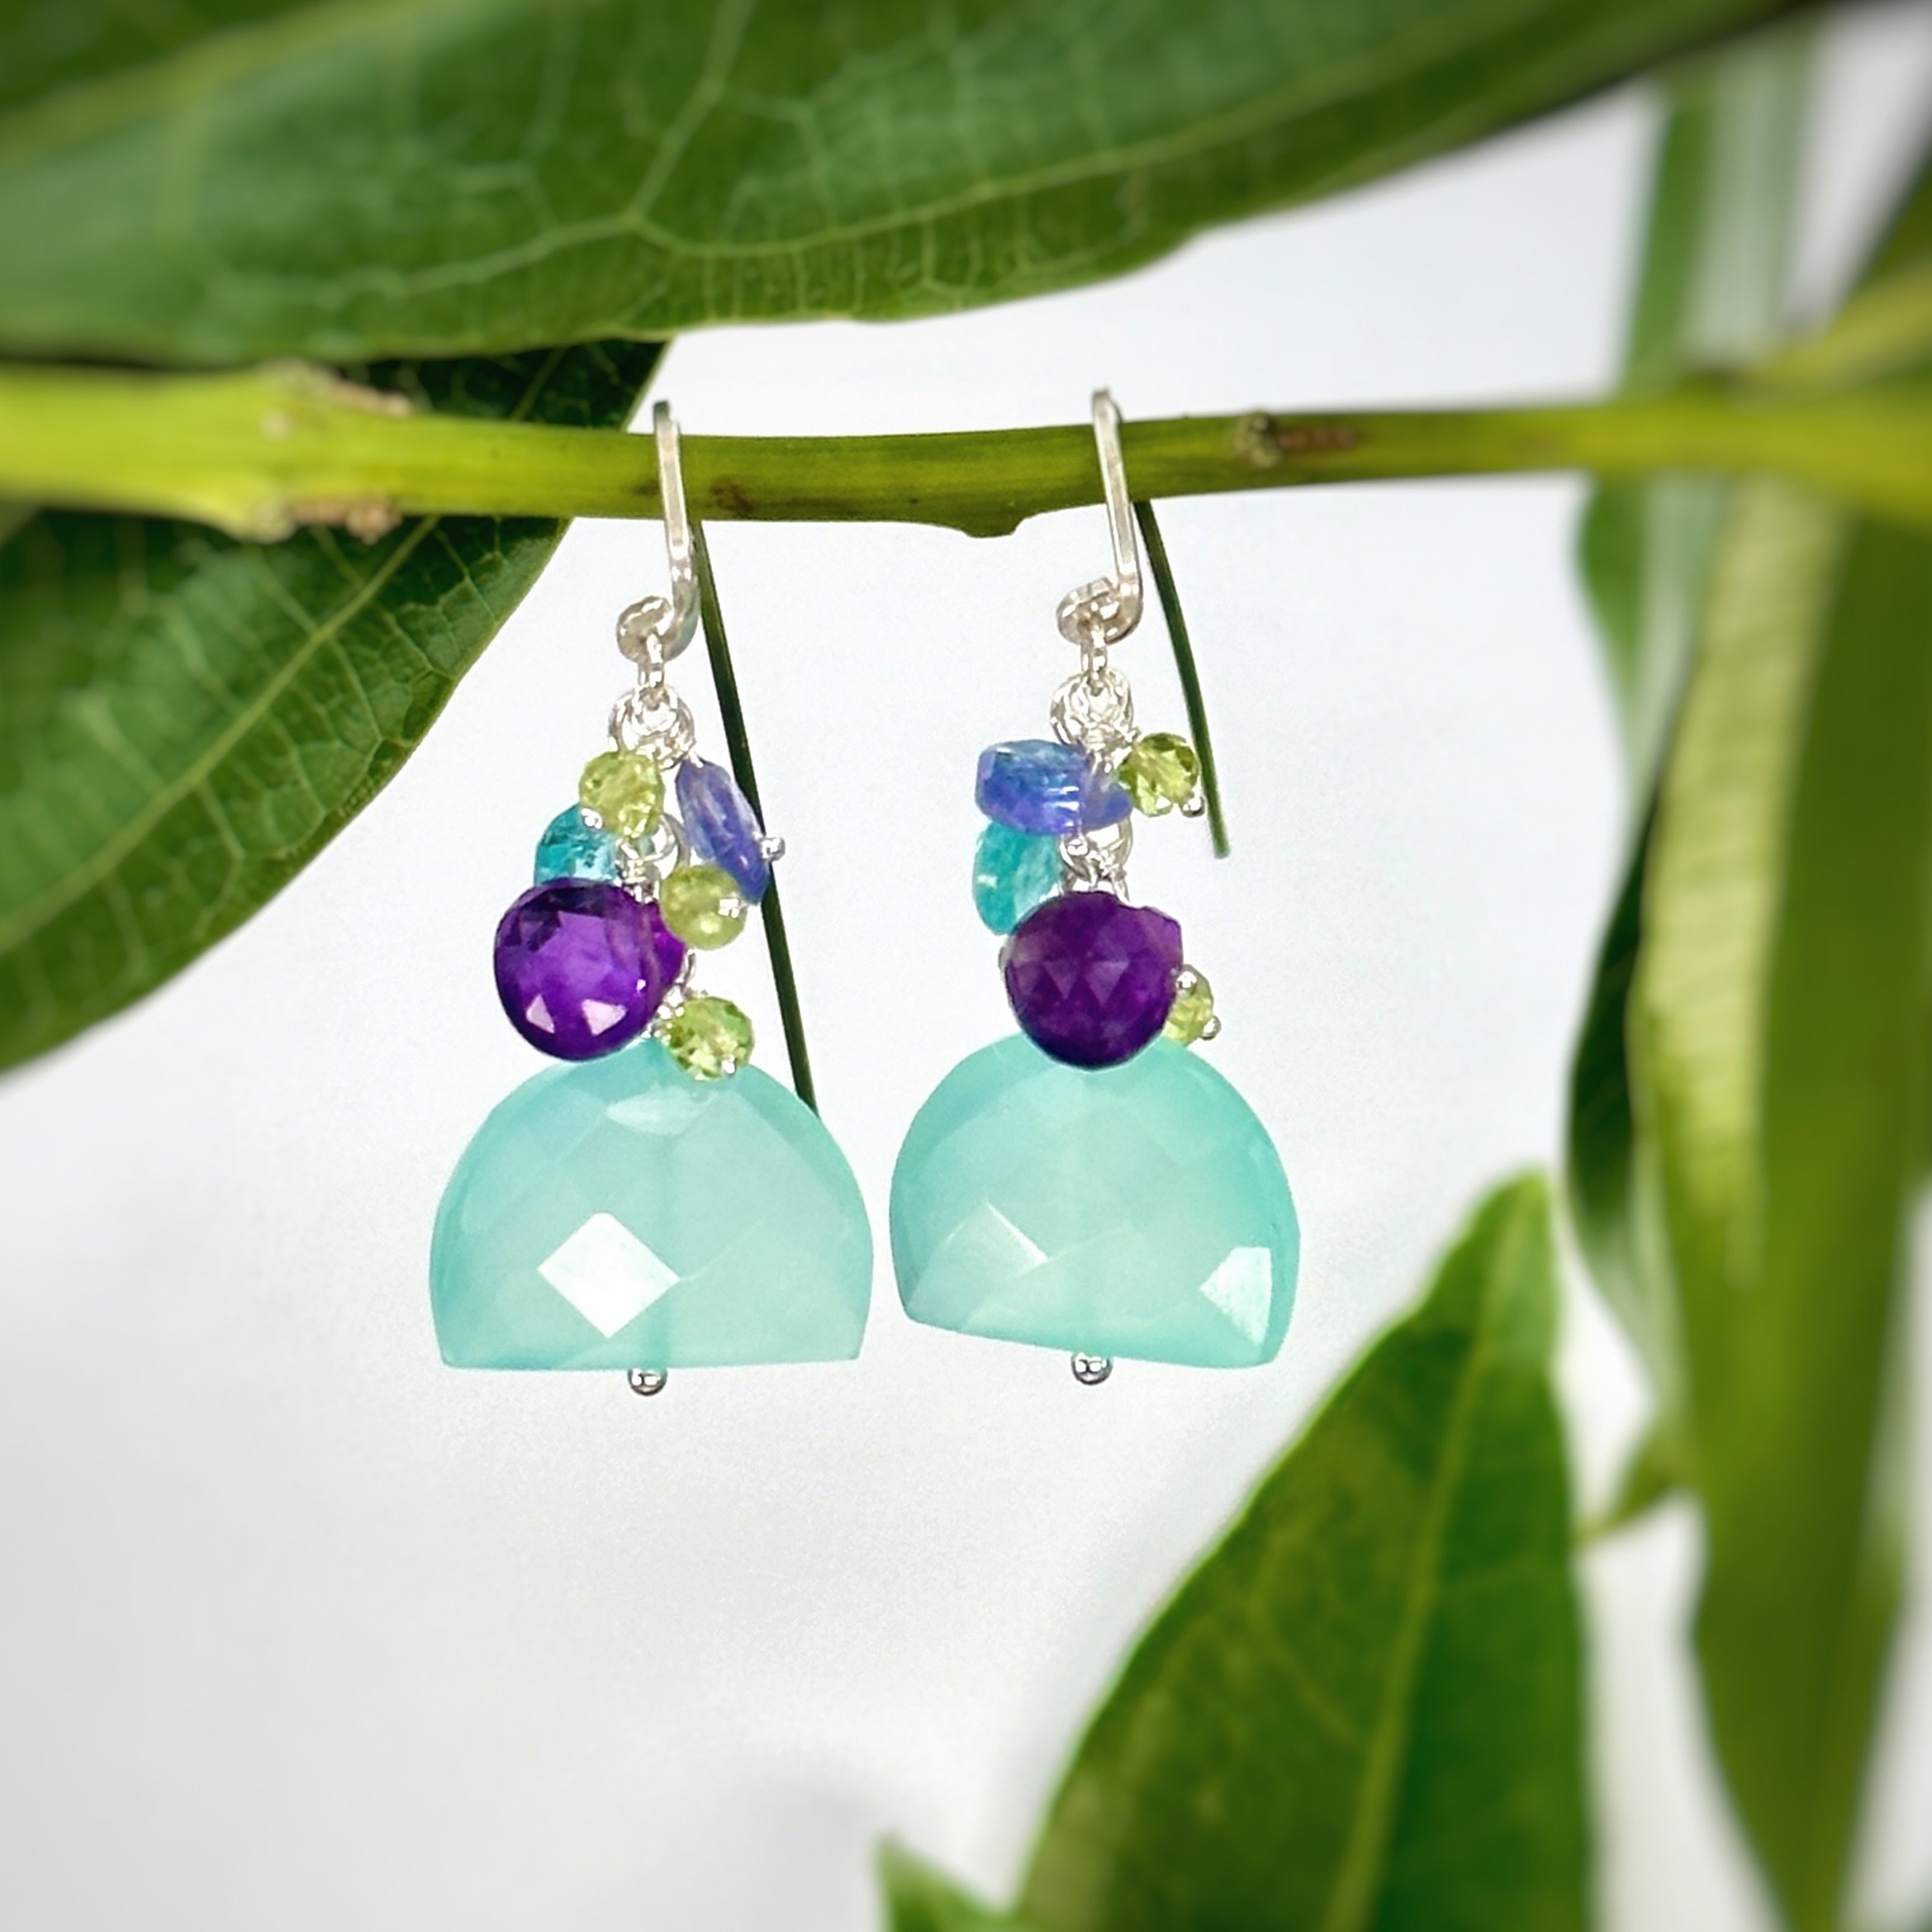 🌸The Orchid Earrings! 

A dazzling pair of earrings with aqua chalcedony + purple amethyst + tanzanite + peridot! 

This pair of earrings, a pair of sunnies, jeans, a crisp white shirt and a sassy jacket, sandals and you are ready for a night out th